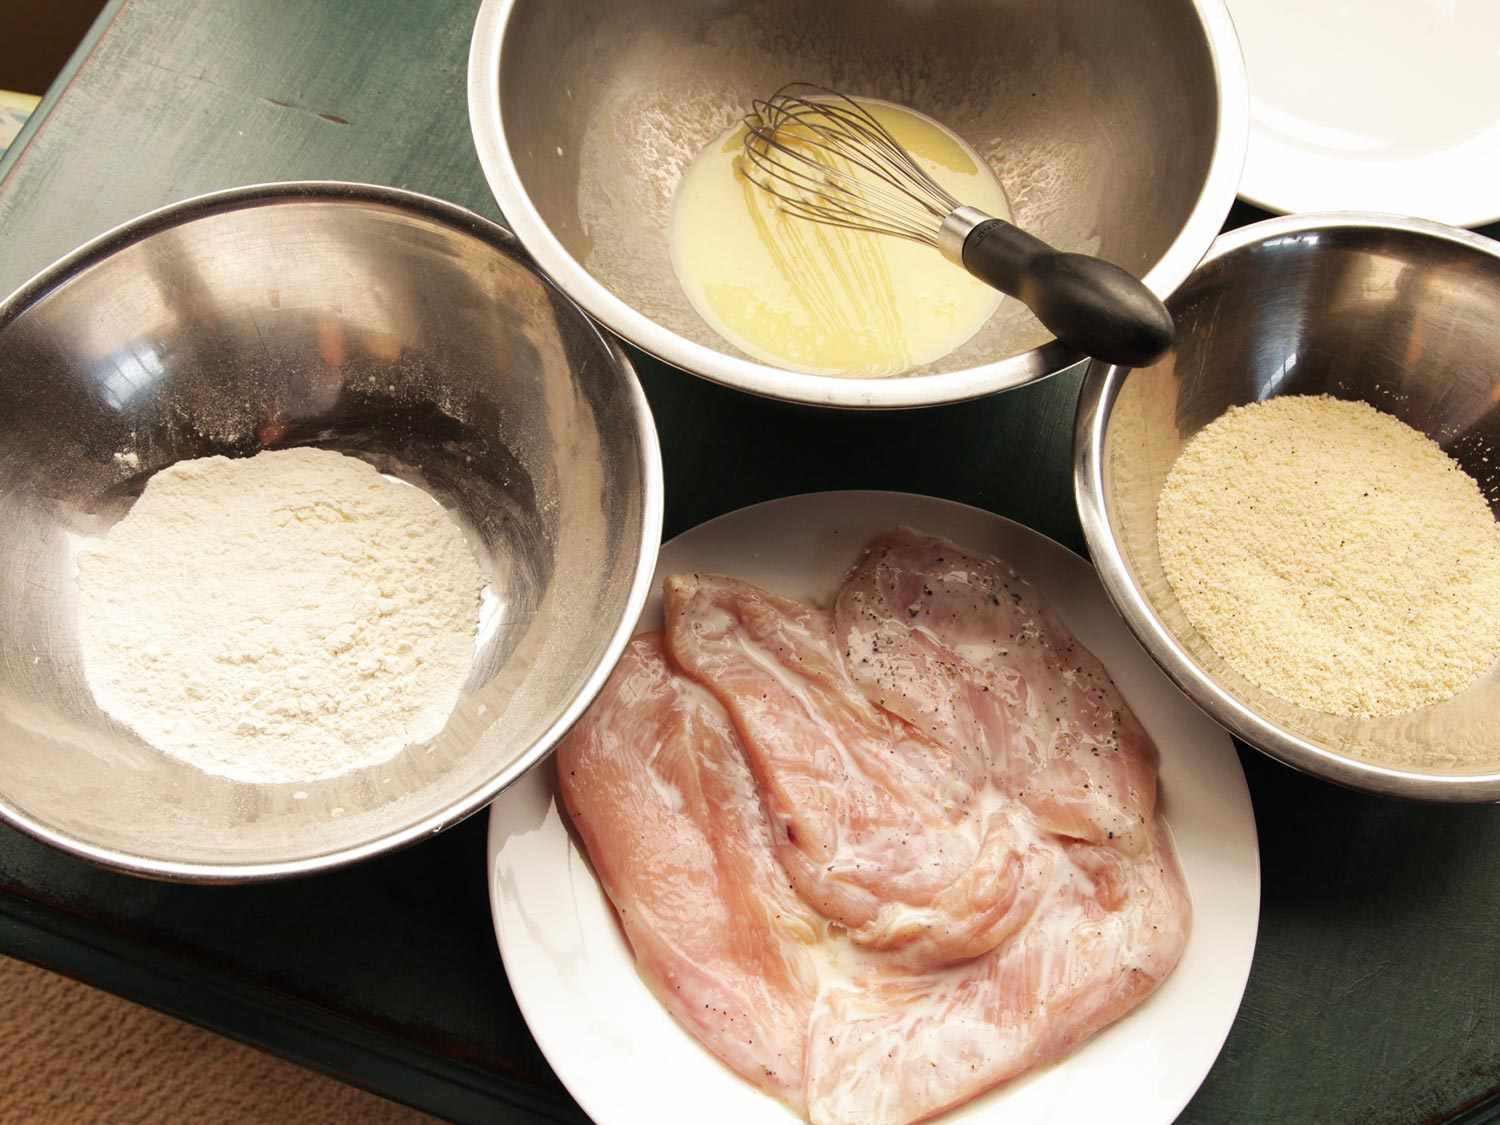 Breading set-up for chicken parmesan: a plate of skinless, boneless chicken breasts, a bowl of flour, a bowl of egg wash, and a bowl of breadcrumbs.